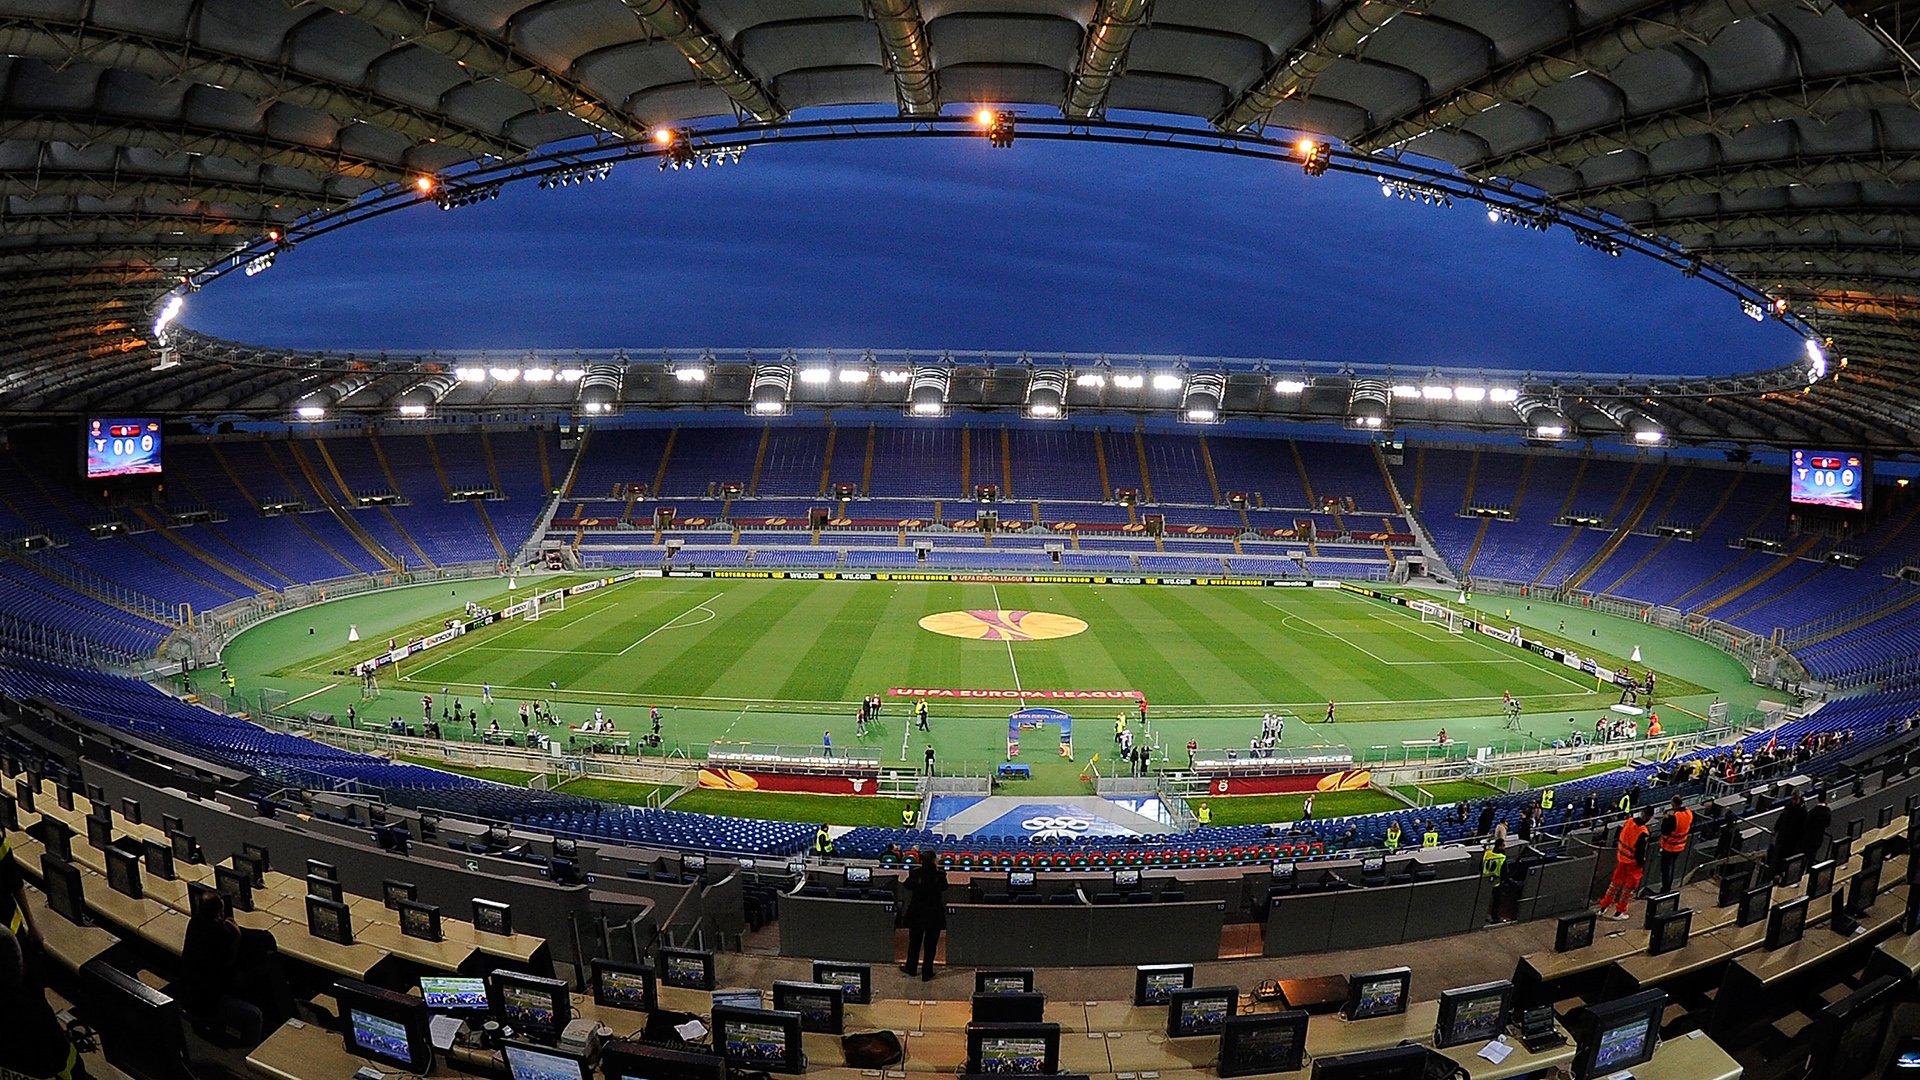 AS Roma VS Cagliari ( BETTING TIPS, Match Preview & Expert Analysis )